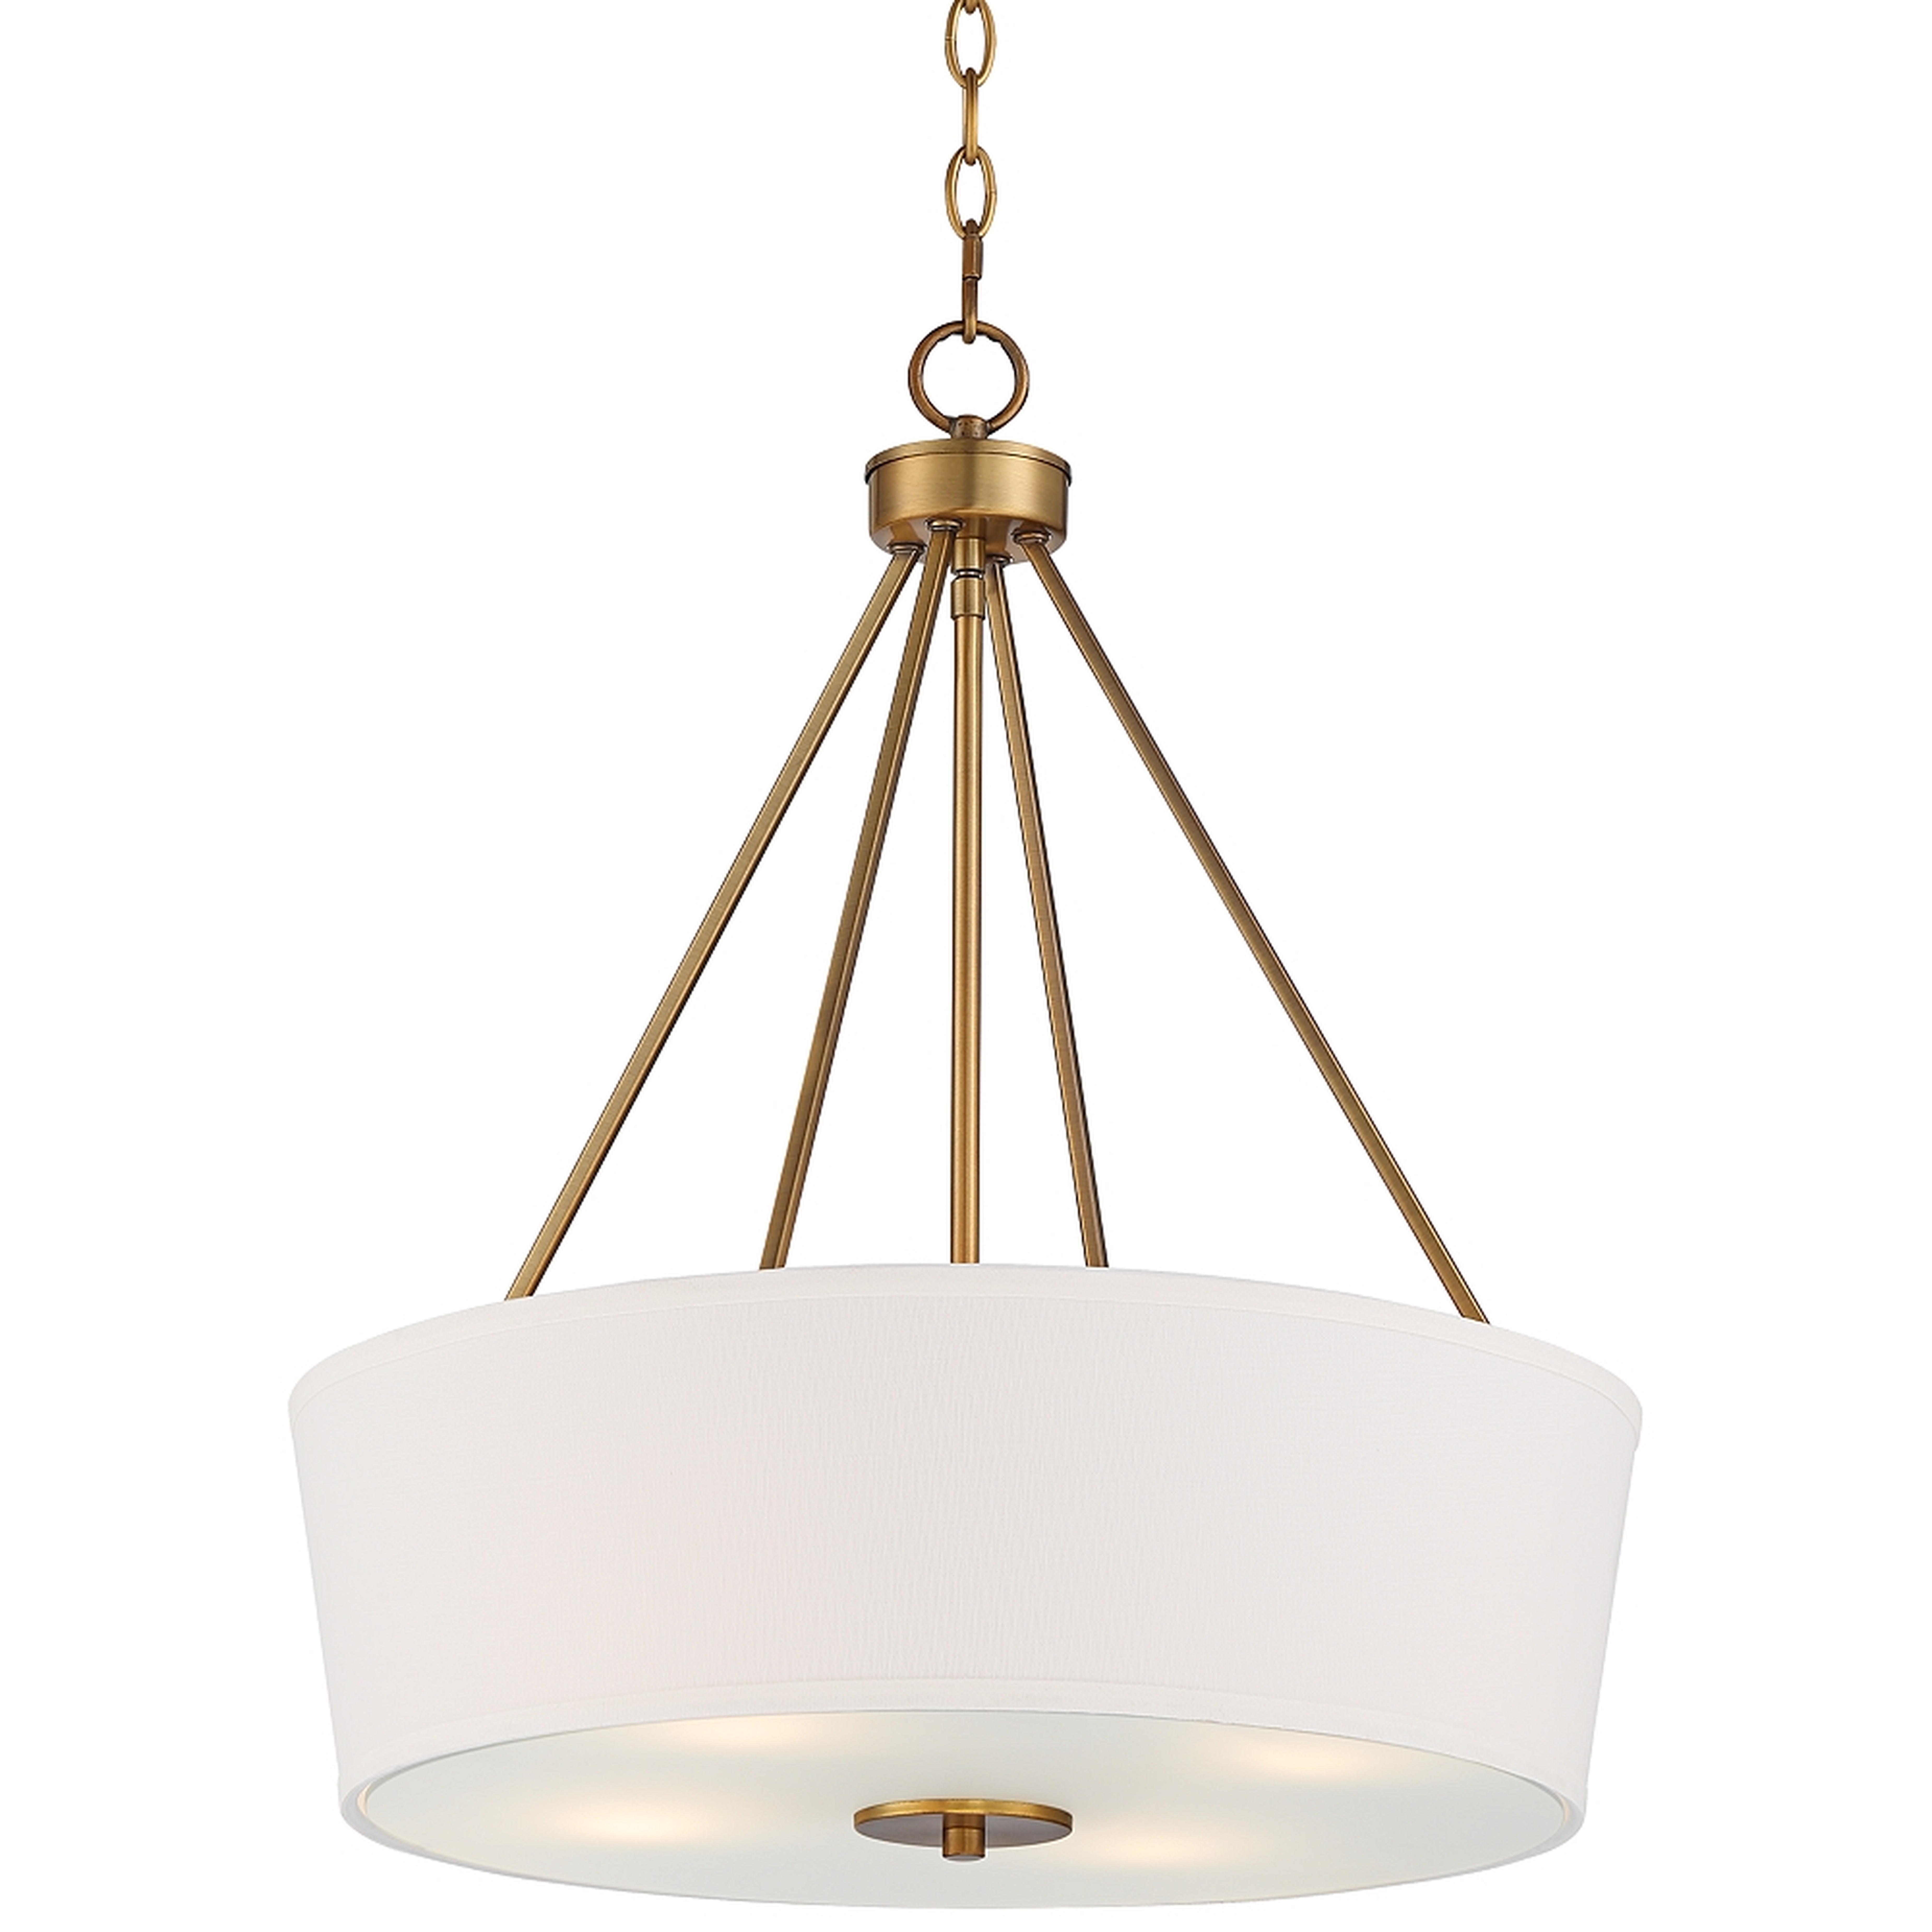 Saffira 20" Wide Warm Brass and Off-White Drum Pendant Light - Style # 86R28 - Lamps Plus